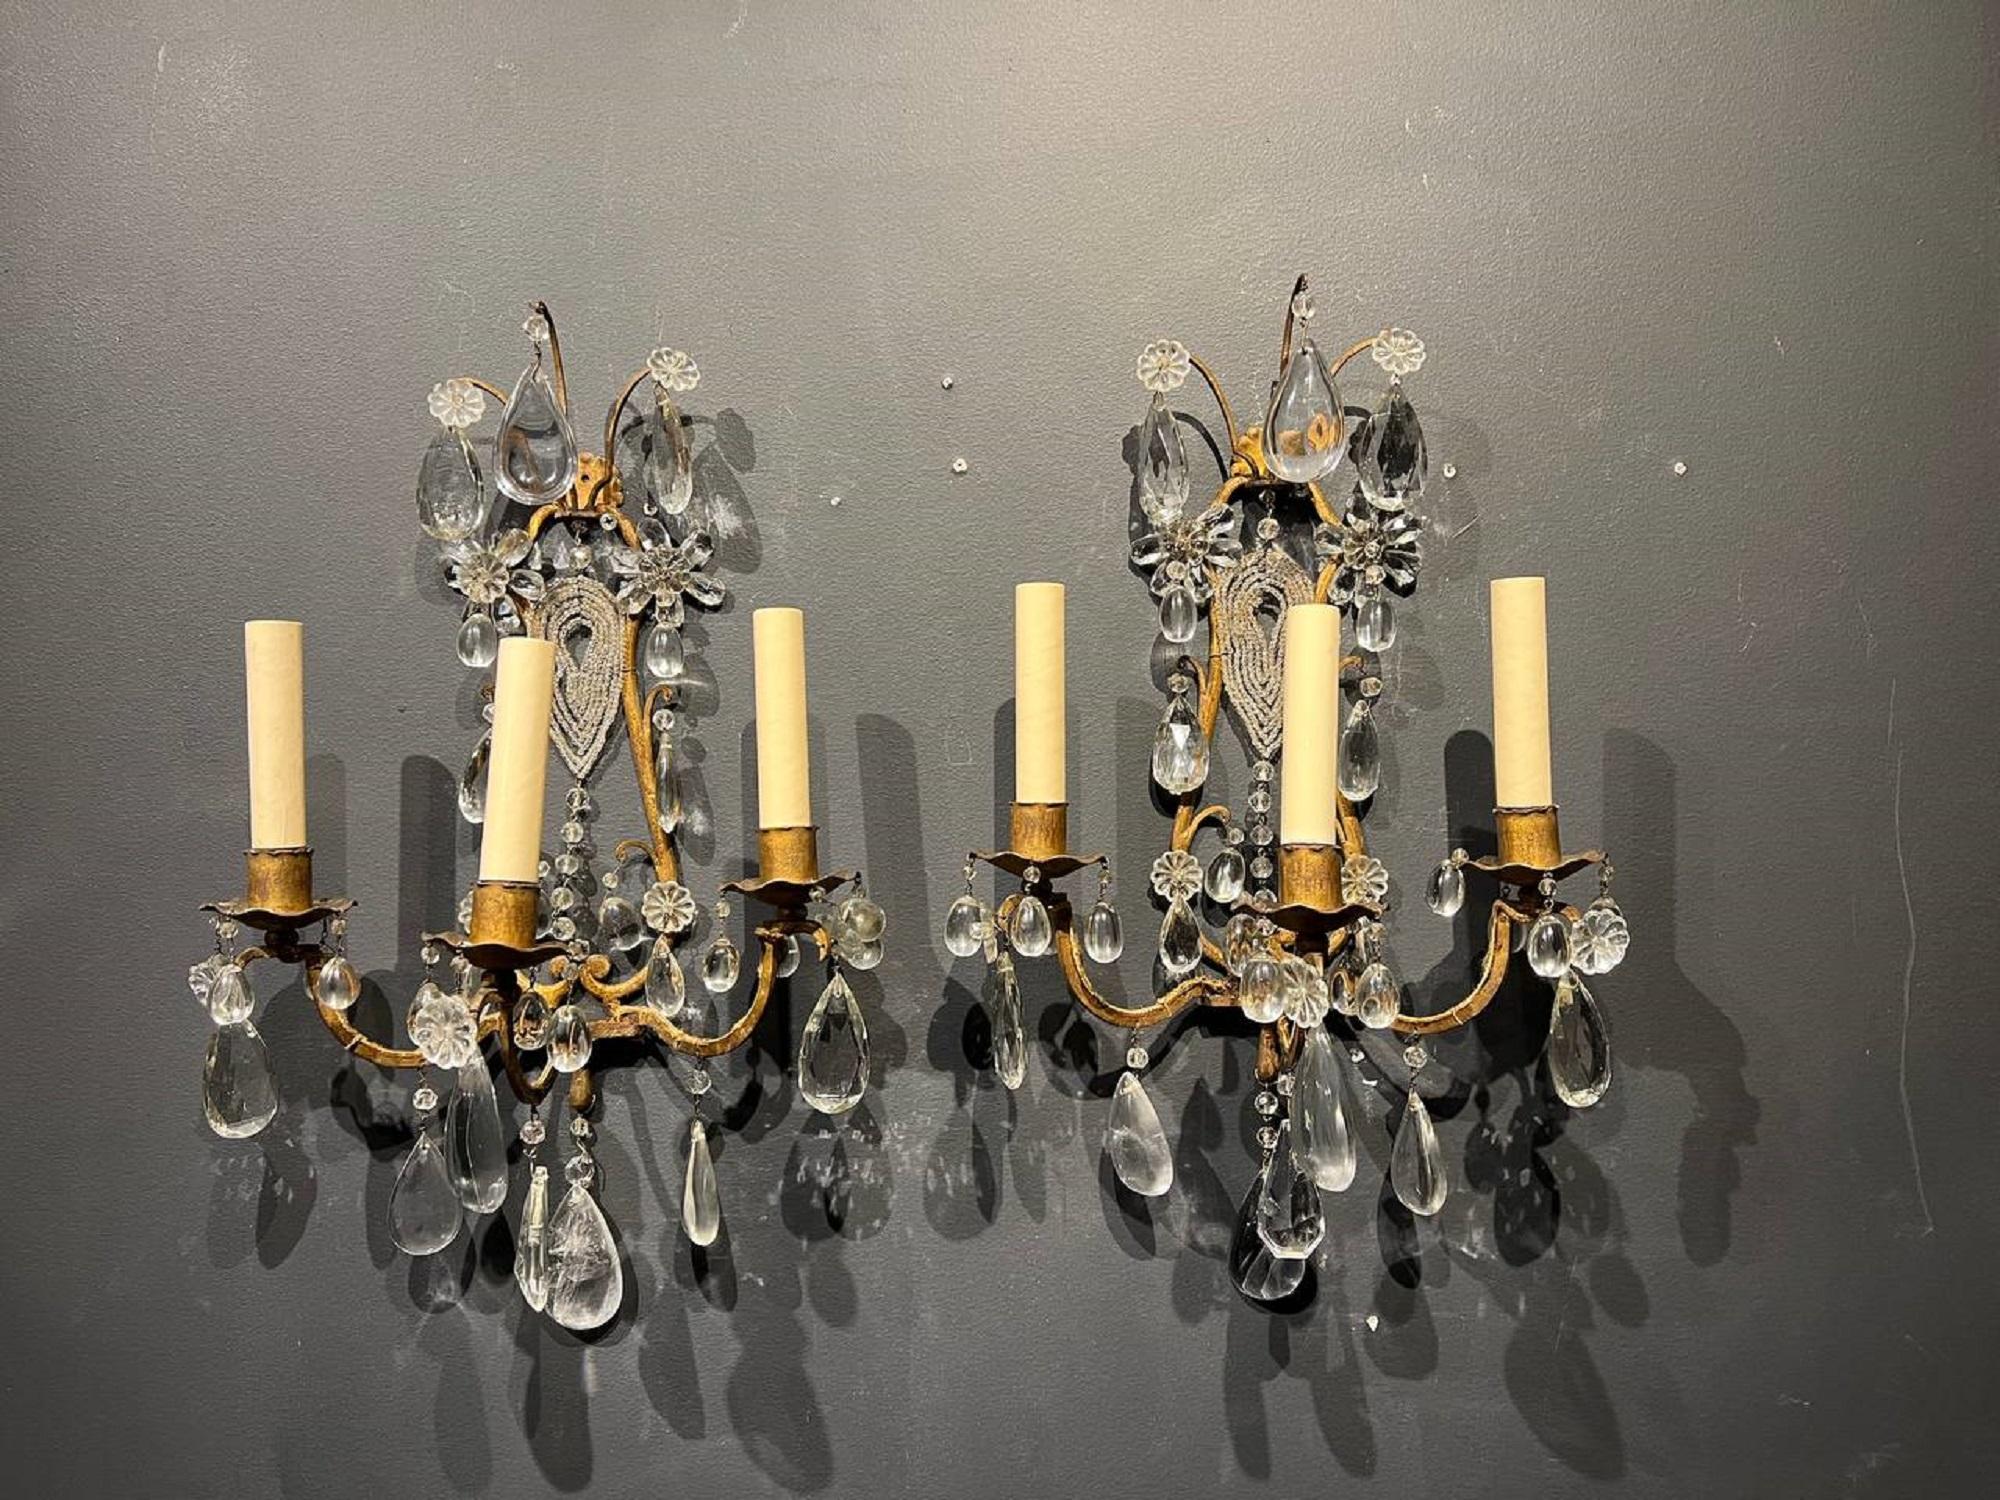 A pair of 1930’s French Bagues sconces with crystal hangings. In very good vintage condition, with original finish and patina. Newly rewired for the US. 

Color: Gold

Up to 120V (US Standard)
Hardwired

Dealer: G302YP.
 